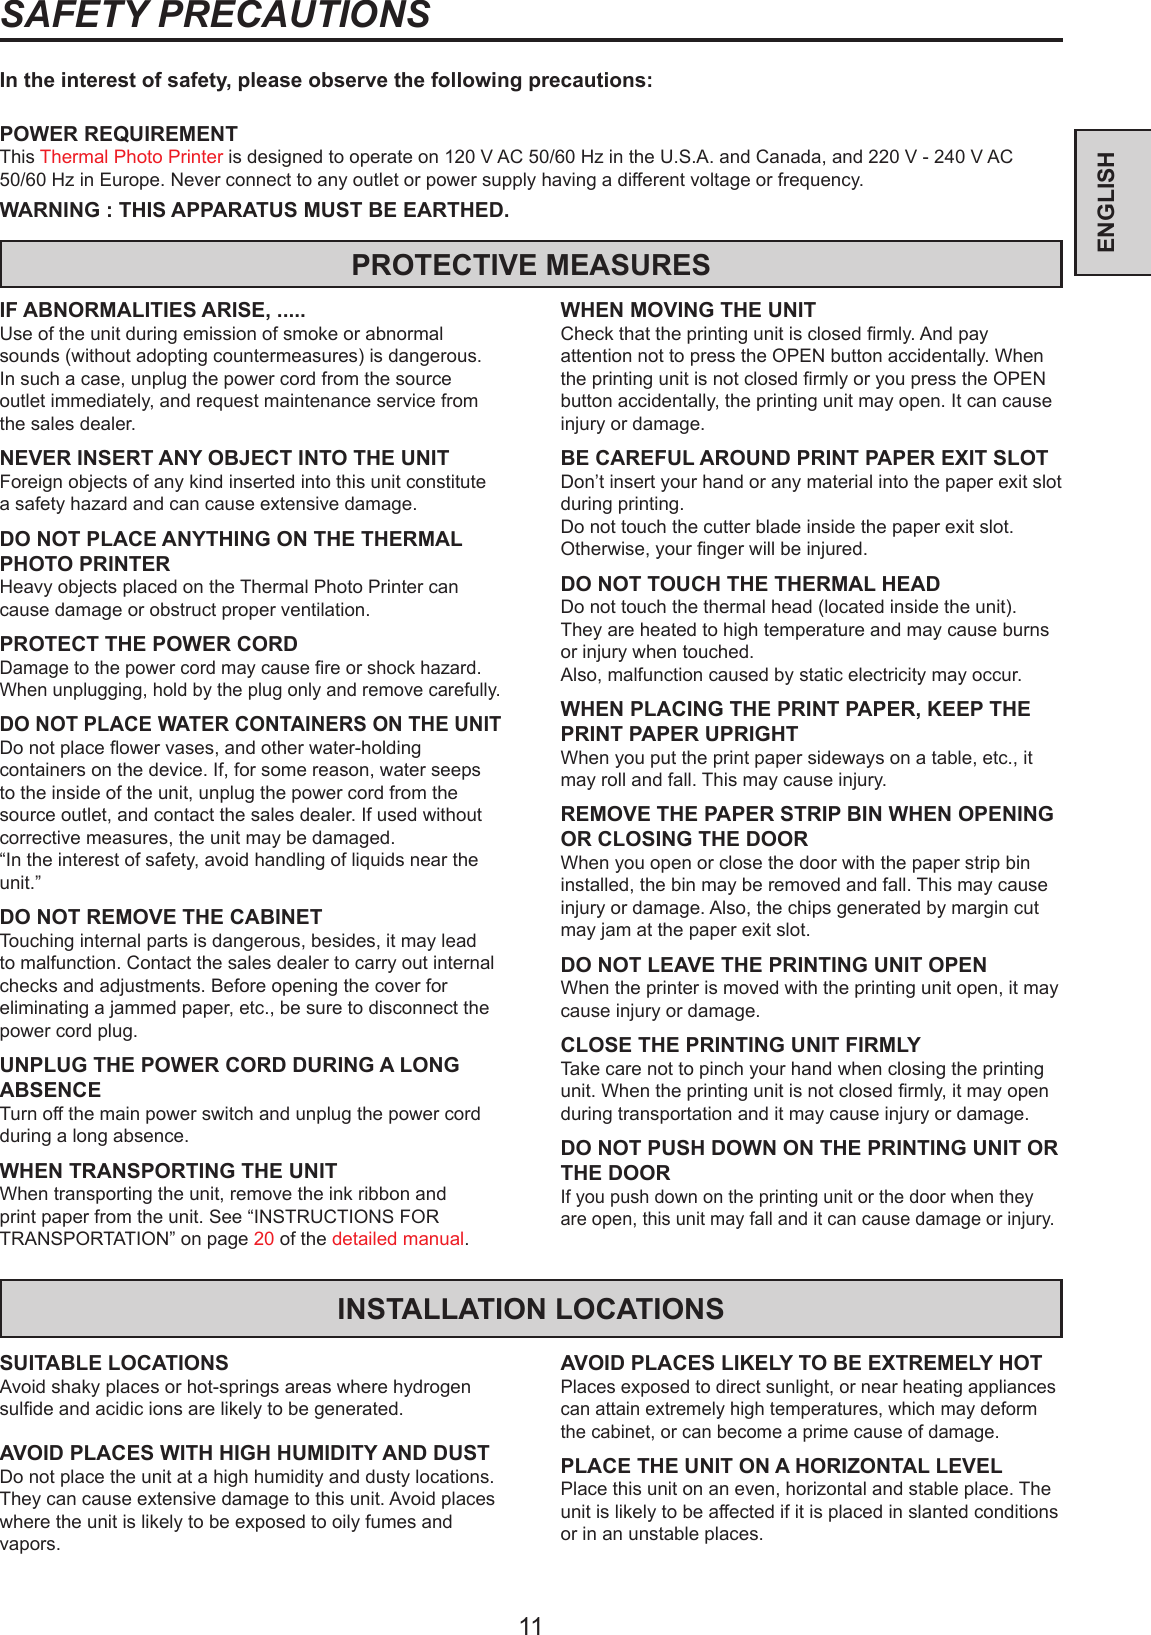 11ENGLISHSAFETY PRECAUTIONSIn the interest of safety, please observe the following precautions:POWER REQUIREMENTThis Thermal Photo Printer is designed to operate on 120 V AC 50/60 Hz in the U.S.A. and Canada, and 220 V - 240 V AC 50/60 Hz in Europe. Never connect to any outlet or power supply having a different voltage or frequency.WARNING : THIS APPARATUS MUST BE EARTHED.PROTECTIVE MEASURESIF ABNORMALITIES ARISE, .....Use of the unit during emission of smoke or abnormal sounds (without adopting countermeasures) is dangerous. In such a case, unplug the power cord from the source outlet immediately, and request maintenance service from the sales dealer.NEVER INSERT ANY OBJECT INTO THE UNITForeign objects of any kind inserted into this unit constitute a safety hazard and can cause extensive damage.DO NOT PLACE ANYTHING ON THE THERMAL PHOTO PRINTERHeavy objects placed on the Thermal Photo Printer can cause damage or obstruct proper ventilation.PROTECT THE POWER CORDDamage to the power cord may cause re or shock hazard. When unplugging, hold by the plug only and remove carefully.DO NOT PLACE WATER CONTAINERS ON THE UNITDo not place ower vases, and other water-holding containers on the device. If, for some reason, water seeps to the inside of the unit, unplug the power cord from the source outlet, and contact the sales dealer. If used without corrective measures, the unit may be damaged.“In the interest of safety, avoid handling of liquids near the unit.”DO NOT REMOVE THE CABINETTouching internal parts is dangerous, besides, it may lead to malfunction. Contact the sales dealer to carry out internal checks and adjustments. Before opening the cover for eliminating a jammed paper, etc., be sure to disconnect the power cord plug.UNPLUG THE POWER CORD DURING A LONG ABSENCETurn off the main power switch and unplug the power cord during a long absence.WHEN TRANSPORTING THE UNITWhen transporting the unit, remove the ink ribbon and print paper from the unit. See “INSTRUCTIONS FOR TRANSPORTATION” on page 20 of the detailed manual.WHEN MOVING THE UNITCheck that the printing unit is closed rmly. And pay attention not to press the OPEN button accidentally. When the printing unit is not closed rmly or you press the OPEN button accidentally, the printing unit may open. It can cause injury or damage.BE CAREFUL AROUND PRINT PAPER EXIT SLOTDon’t insert your hand or any material into the paper exit slot during printing.Do not touch the cutter blade inside the paper exit slot.Otherwise, your nger will be injured.DO NOT TOUCH THE THERMAL HEADDo not touch the thermal head (located inside the unit).They are heated to high temperature and may cause burns or injury when touched.Also, malfunction caused by static electricity may occur.WHEN PLACING THE PRINT PAPER, KEEP THE PRINT PAPER UPRIGHTWhen you put the print paper sideways on a table, etc., it may roll and fall. This may cause injury.REMOVE THE PAPER STRIP BIN WHEN OPENING OR CLOSING THE DOORWhen you open or close the door with the paper strip bin installed, the bin may be removed and fall. This may cause injury or damage. Also, the chips generated by margin cut may jam at the paper exit slot.DO NOT LEAVE THE PRINTING UNIT OPENWhen the printer is moved with the printing unit open, it may cause injury or damage.CLOSE THE PRINTING UNIT FIRMLYTake care not to pinch your hand when closing the printing unit. When the printing unit is not closed rmly, it may open during transportation and it may cause injury or damage.DO NOT PUSH DOWN ON THE PRINTING UNIT OR THE DOORIf you push down on the printing unit or the door when they are open, this unit may fall and it can cause damage or injury.INSTALLATION LOCATIONSSUITABLE LOCATIONSAvoid shaky places or hot-springs areas where hydrogen sulde and acidic ions are likely to be generated.AVOID PLACES WITH HIGH HUMIDITY AND DUSTDo not place the unit at a high humidity and dusty locations. They can cause extensive damage to this unit. Avoid places where the unit is likely to be exposed to oily fumes and vapors.AVOID PLACES LIKELY TO BE EXTREMELY HOTPlaces exposed to direct sunlight, or near heating appliances can attain extremely high temperatures, which may deform the cabinet, or can become a prime cause of damage.PLACE THE UNIT ON A HORIZONTAL LEVELPlace this unit on an even, horizontal and stable place. The unit is likely to be affected if it is placed in slanted conditions or in an unstable places.